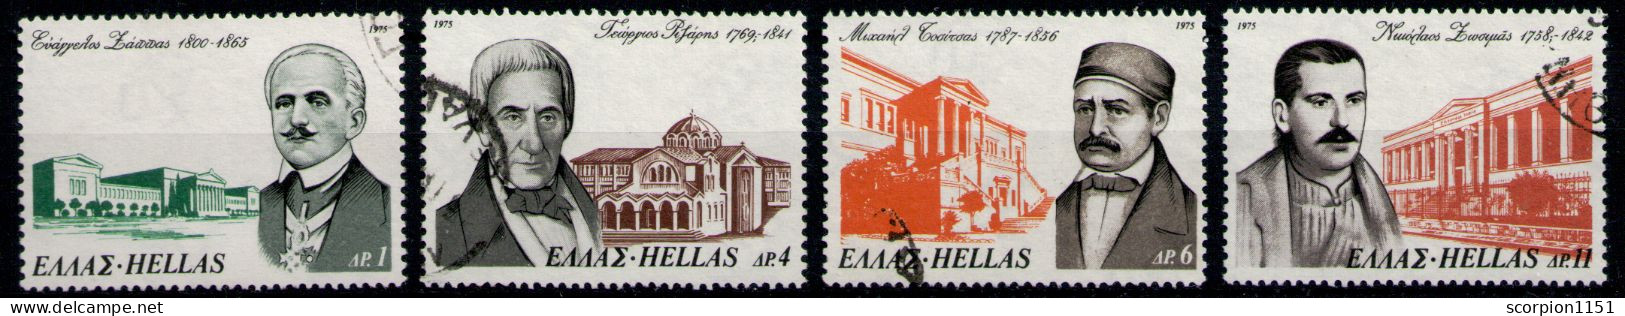 GREECE 1975 - Full Set Used - Used Stamps